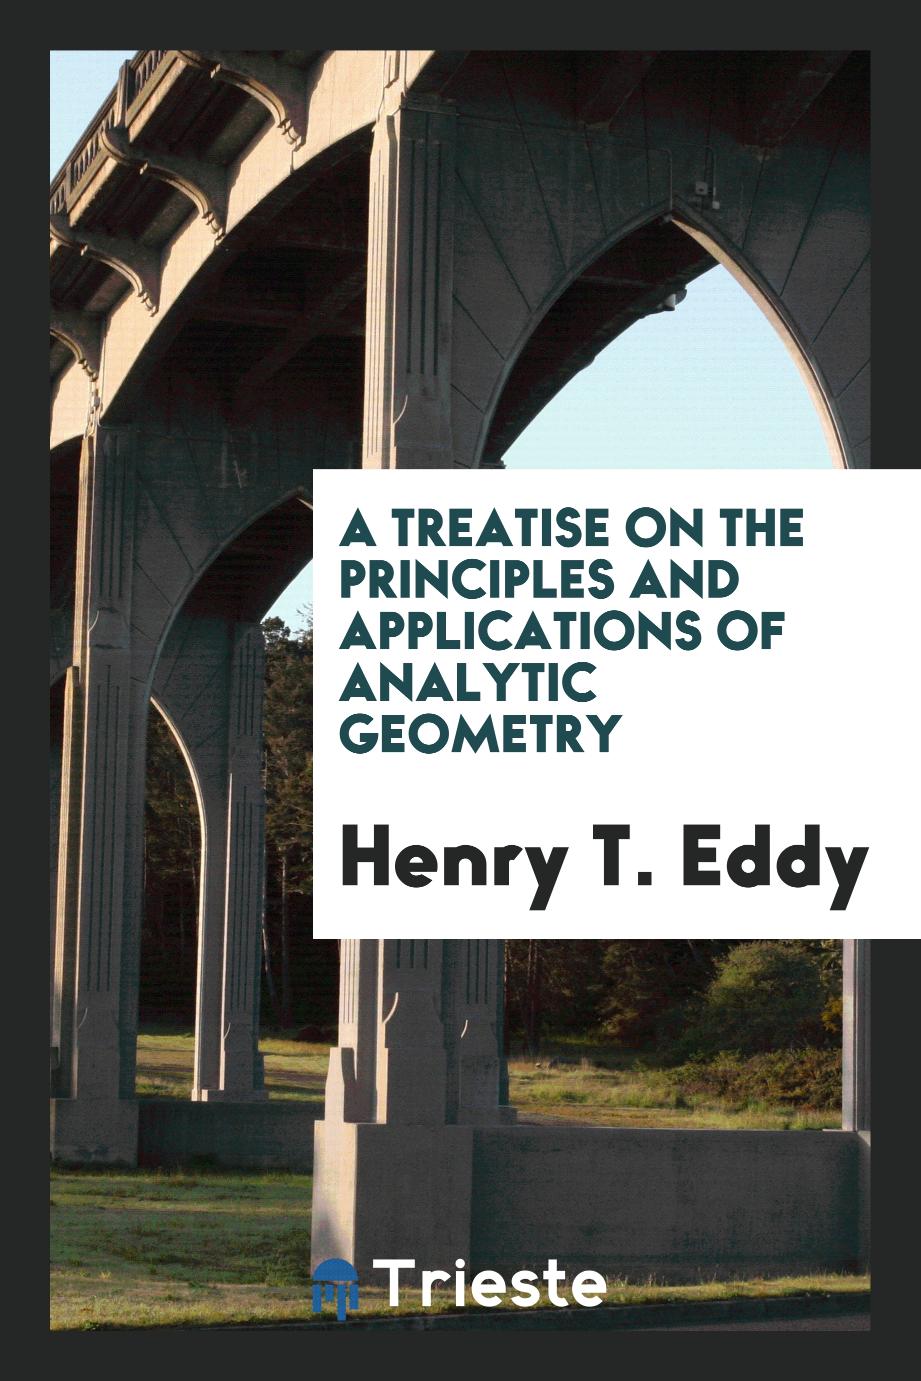 A treatise on the principles and applications of analytic geometry